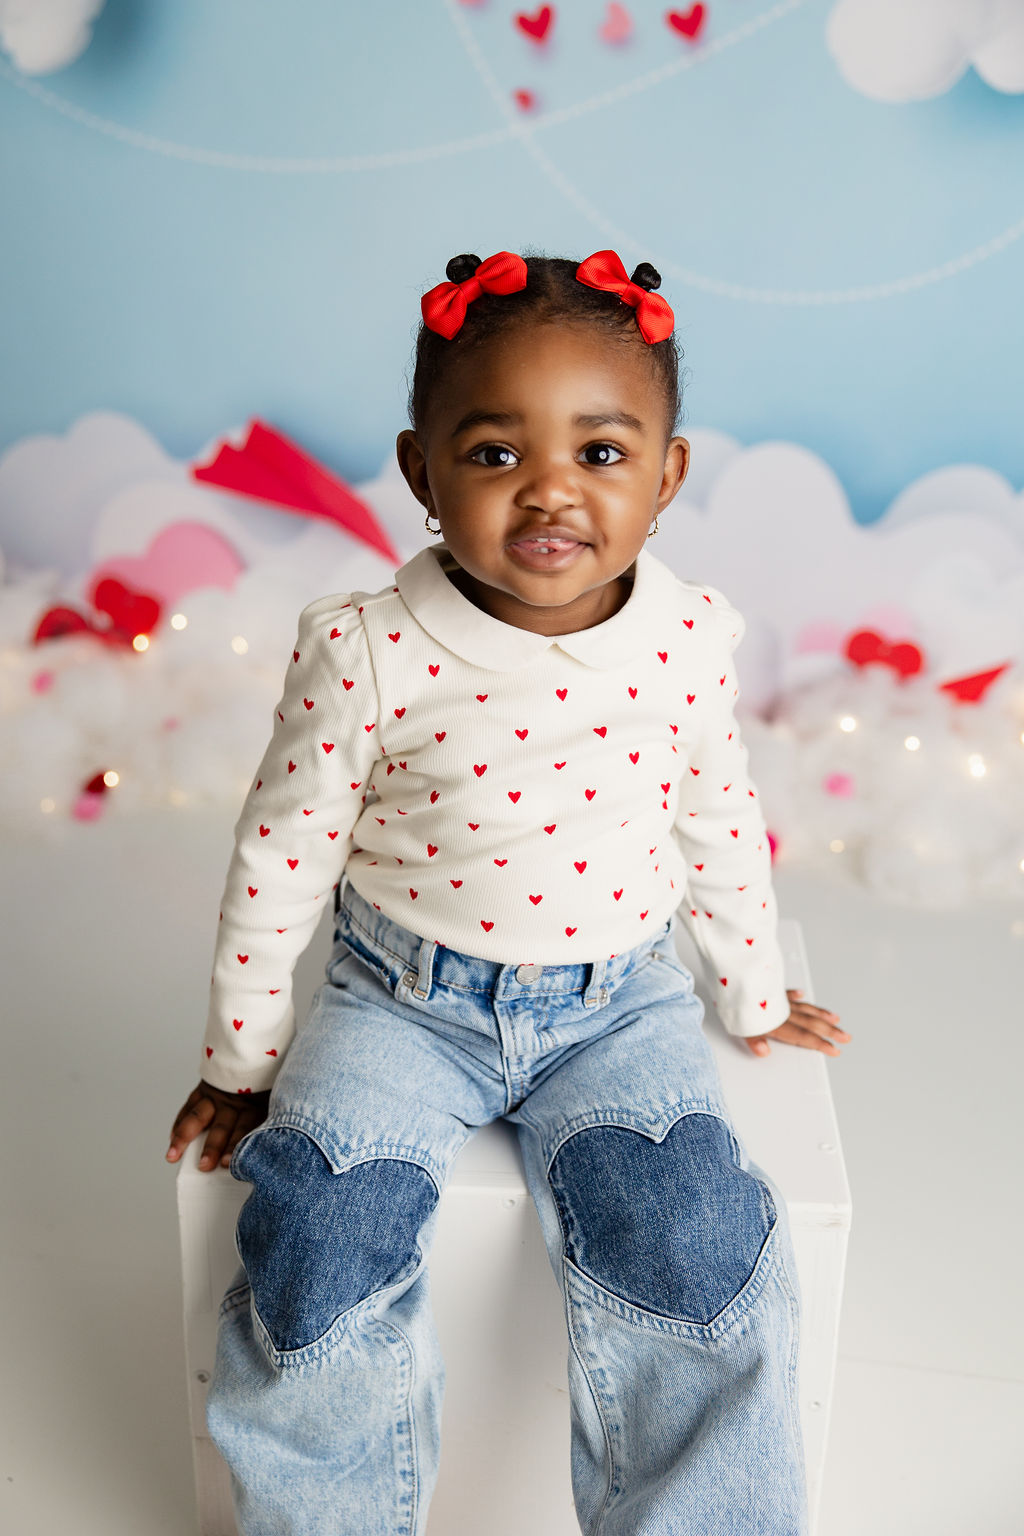 A toddler girl sits on a white box in a studio in jeans and a red heart polka dot shirt